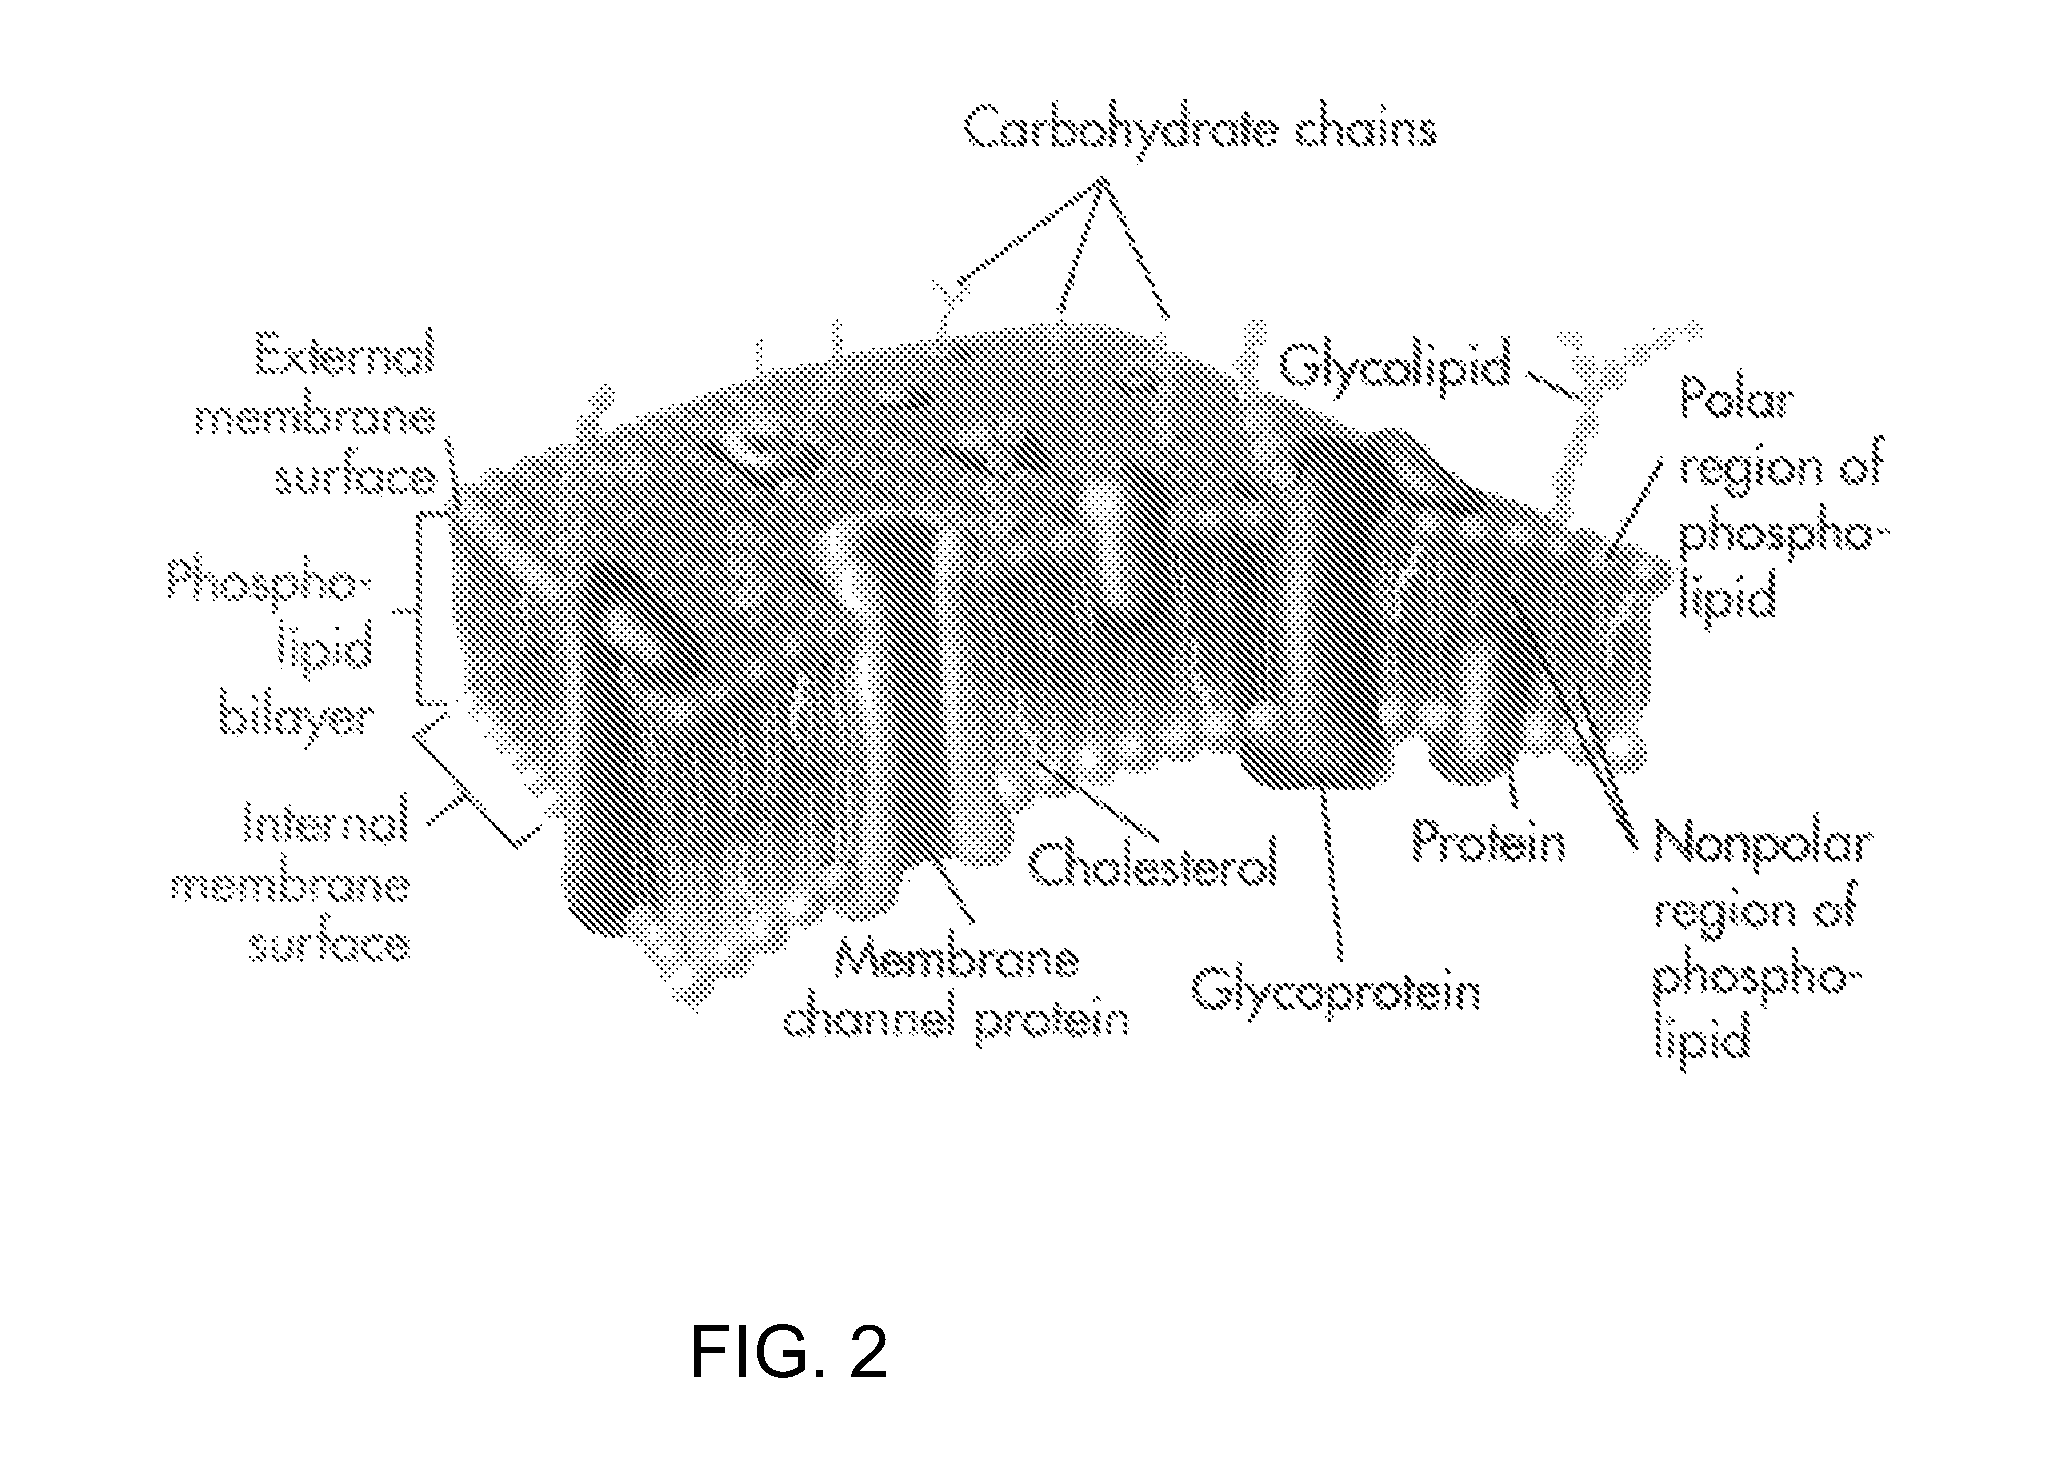 System and method to elicit apoptosis in malignant tumor cells for medical treatment